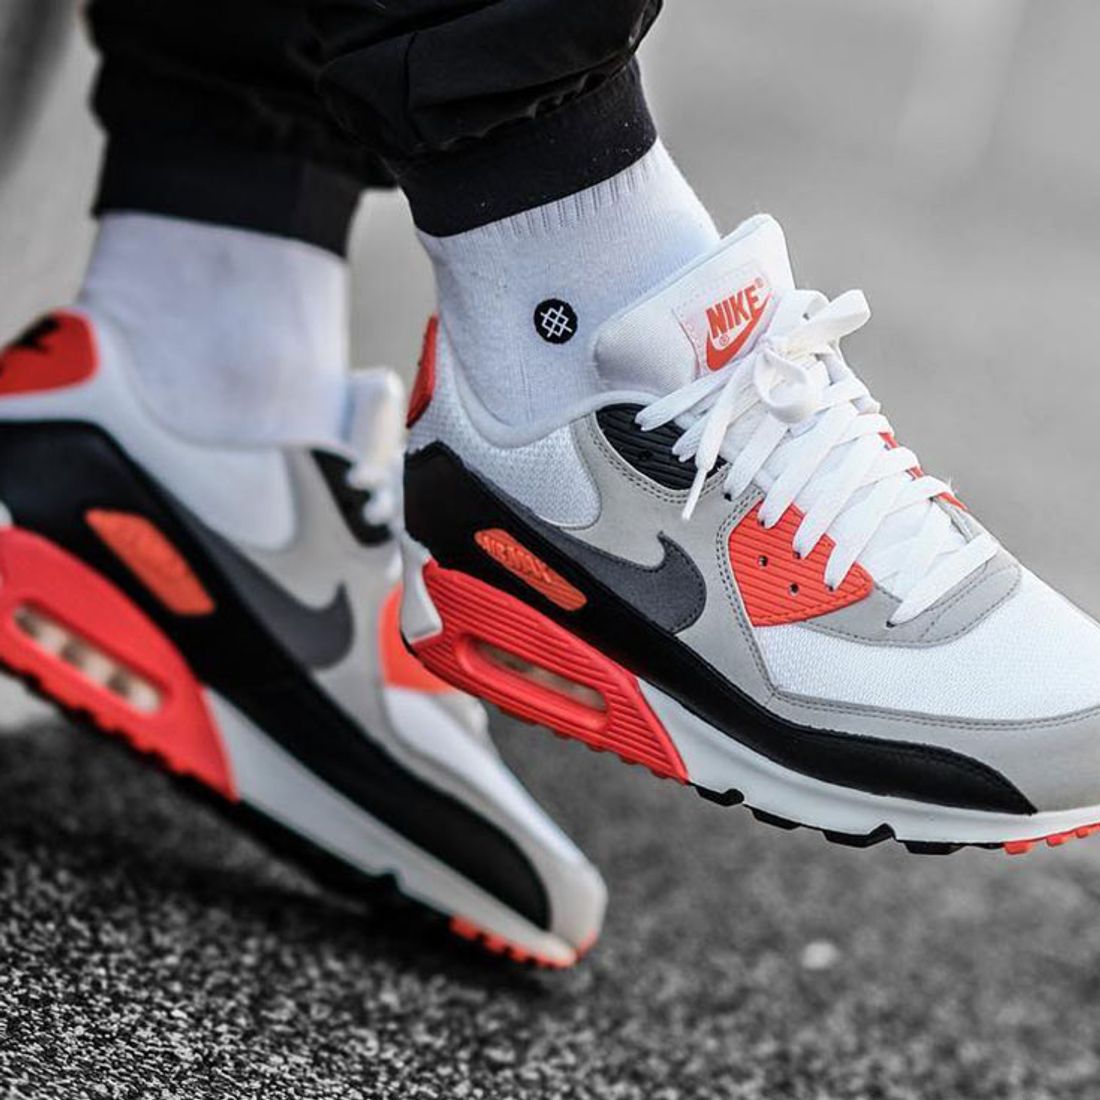 Retros We'd Like to See for the Nike Air Max 90's 30th - Sneaker Freaker